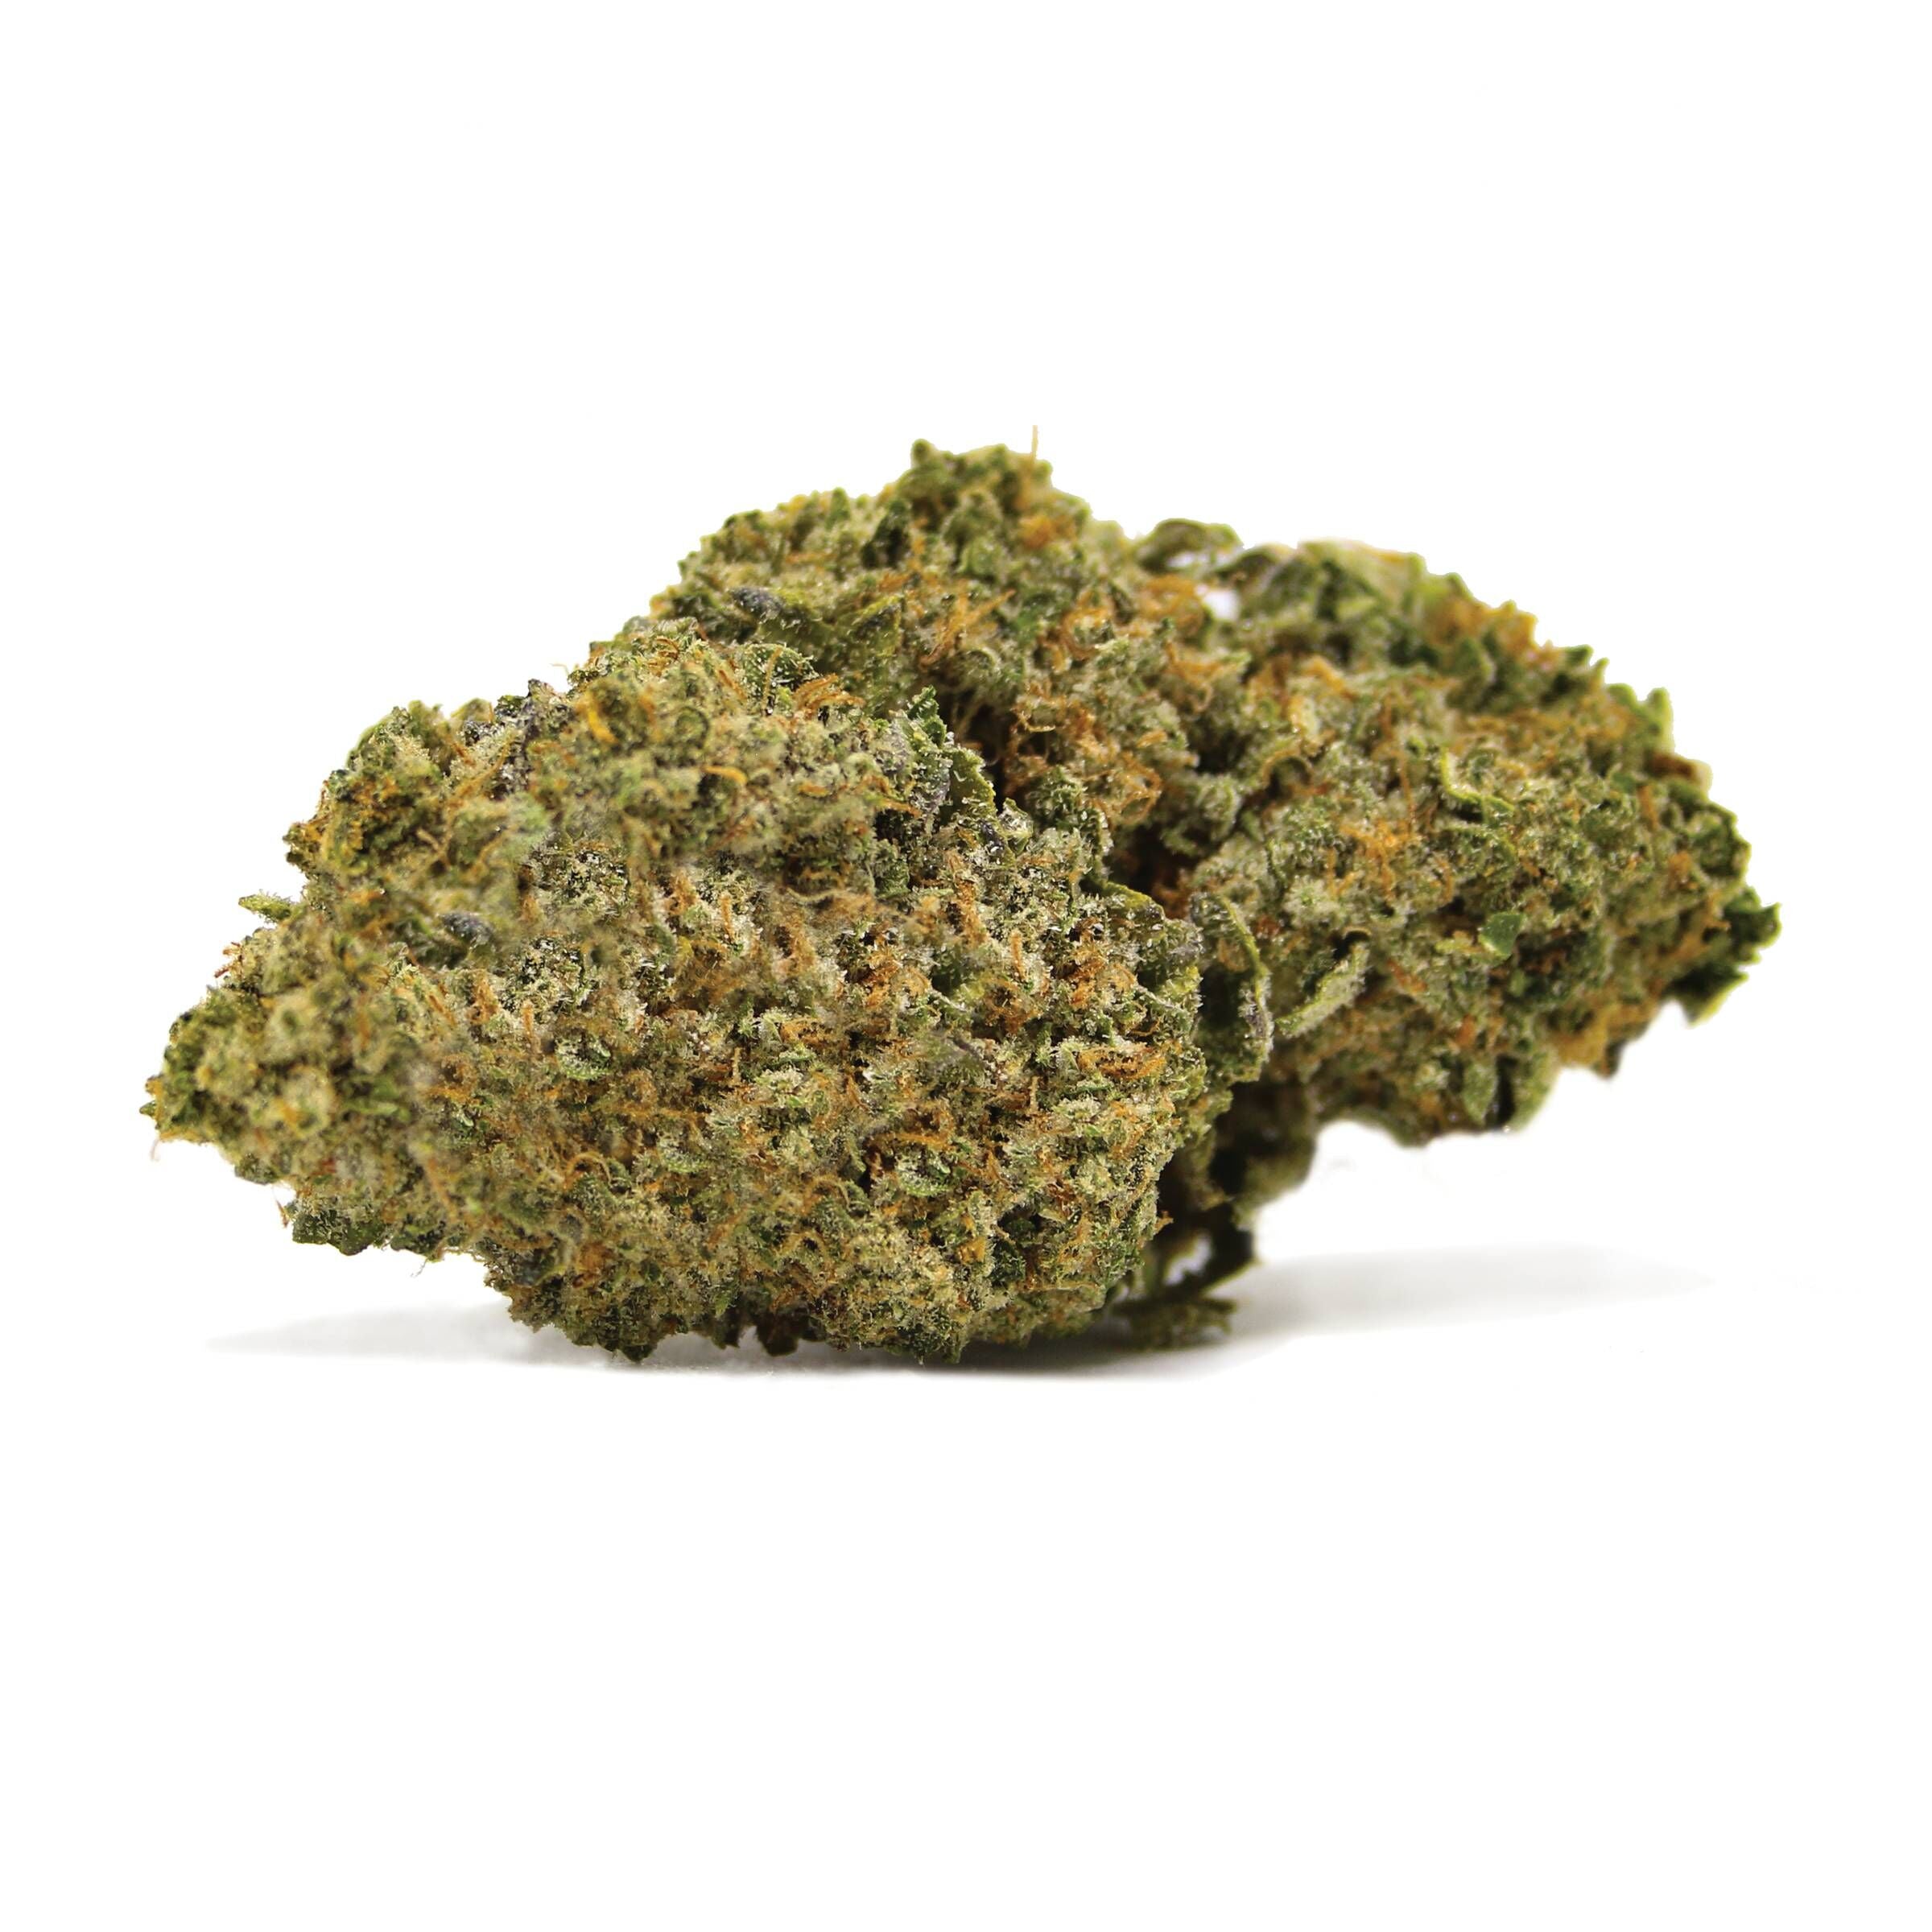 Cannabis Product Rockstar Kush by Spinach - 0